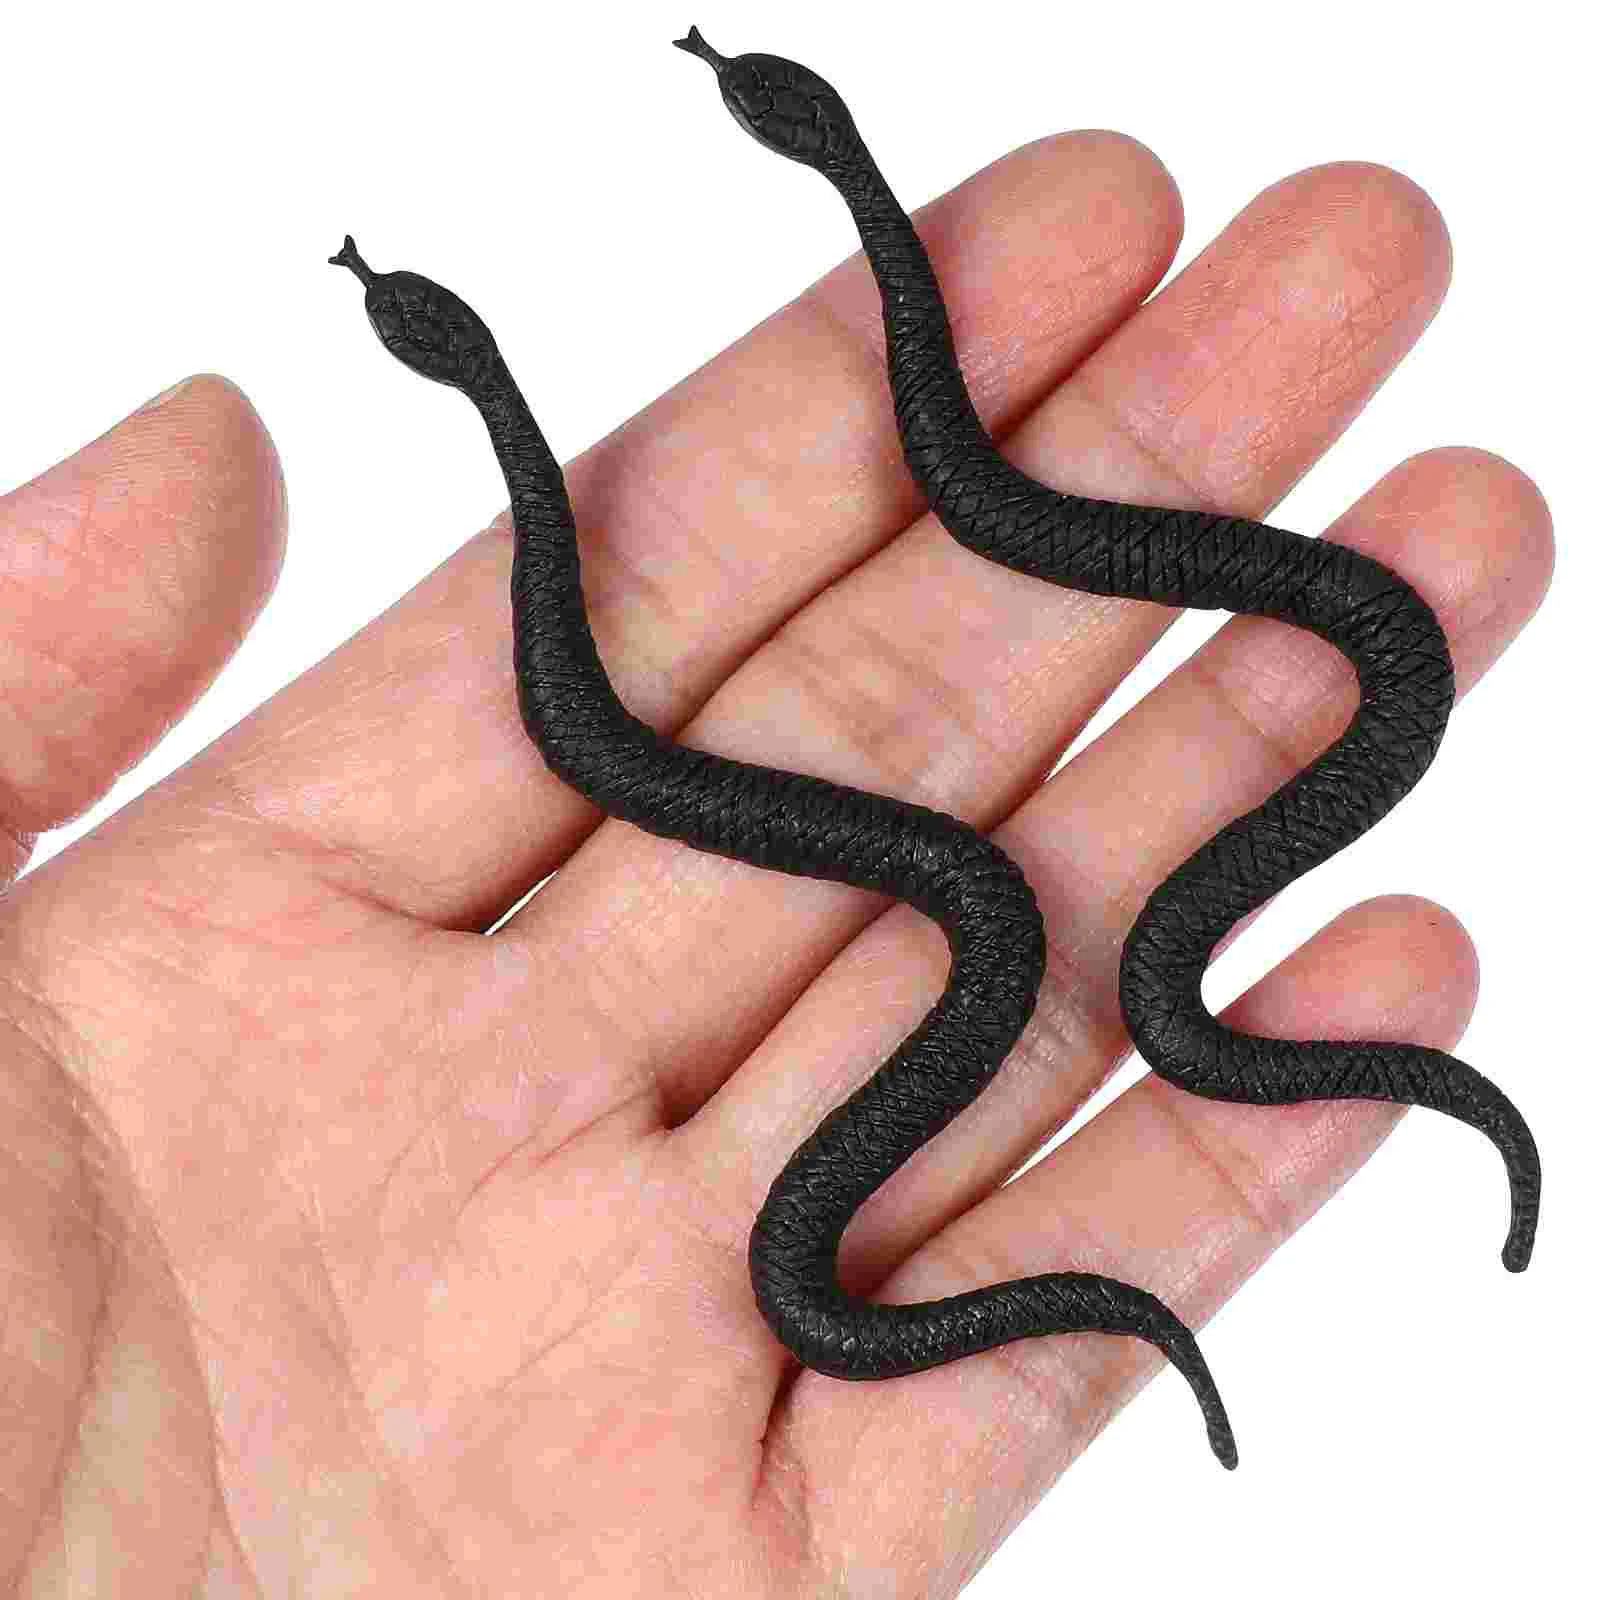 100 Pcs Simulation Snake Model Childrens Toys Faux Snakes Props Fake for Party Plastic Trick Realistic